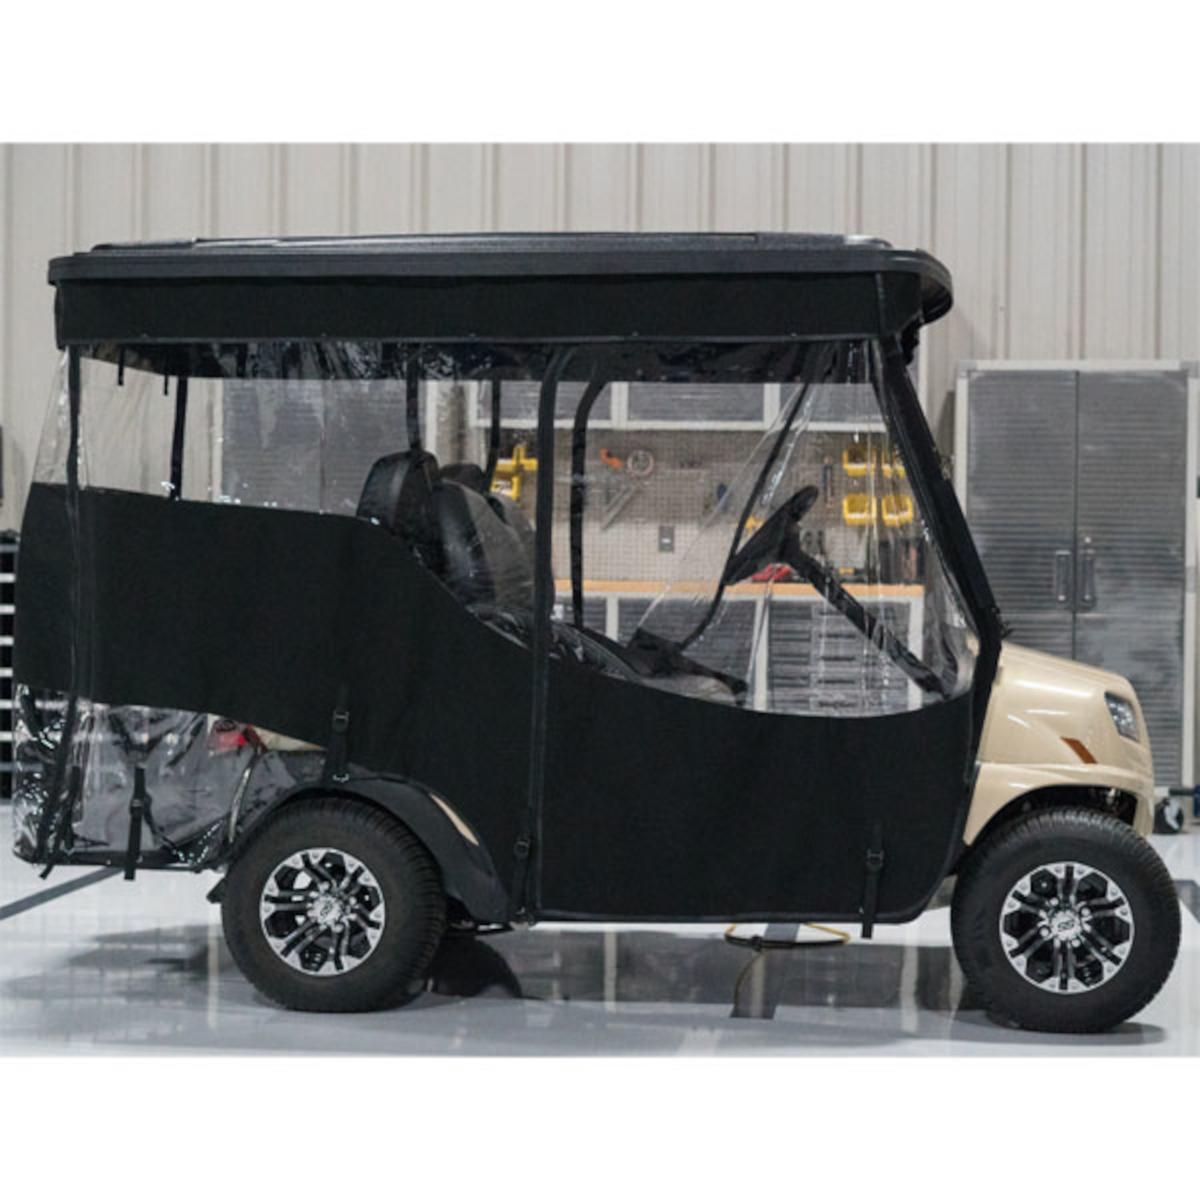 RedDot ICON/EV1 Non-Lifted 4-Passenger Black 3-Sided Track-Style Enclosure (1 Forward Seat, 1 Rear Facing Seat)